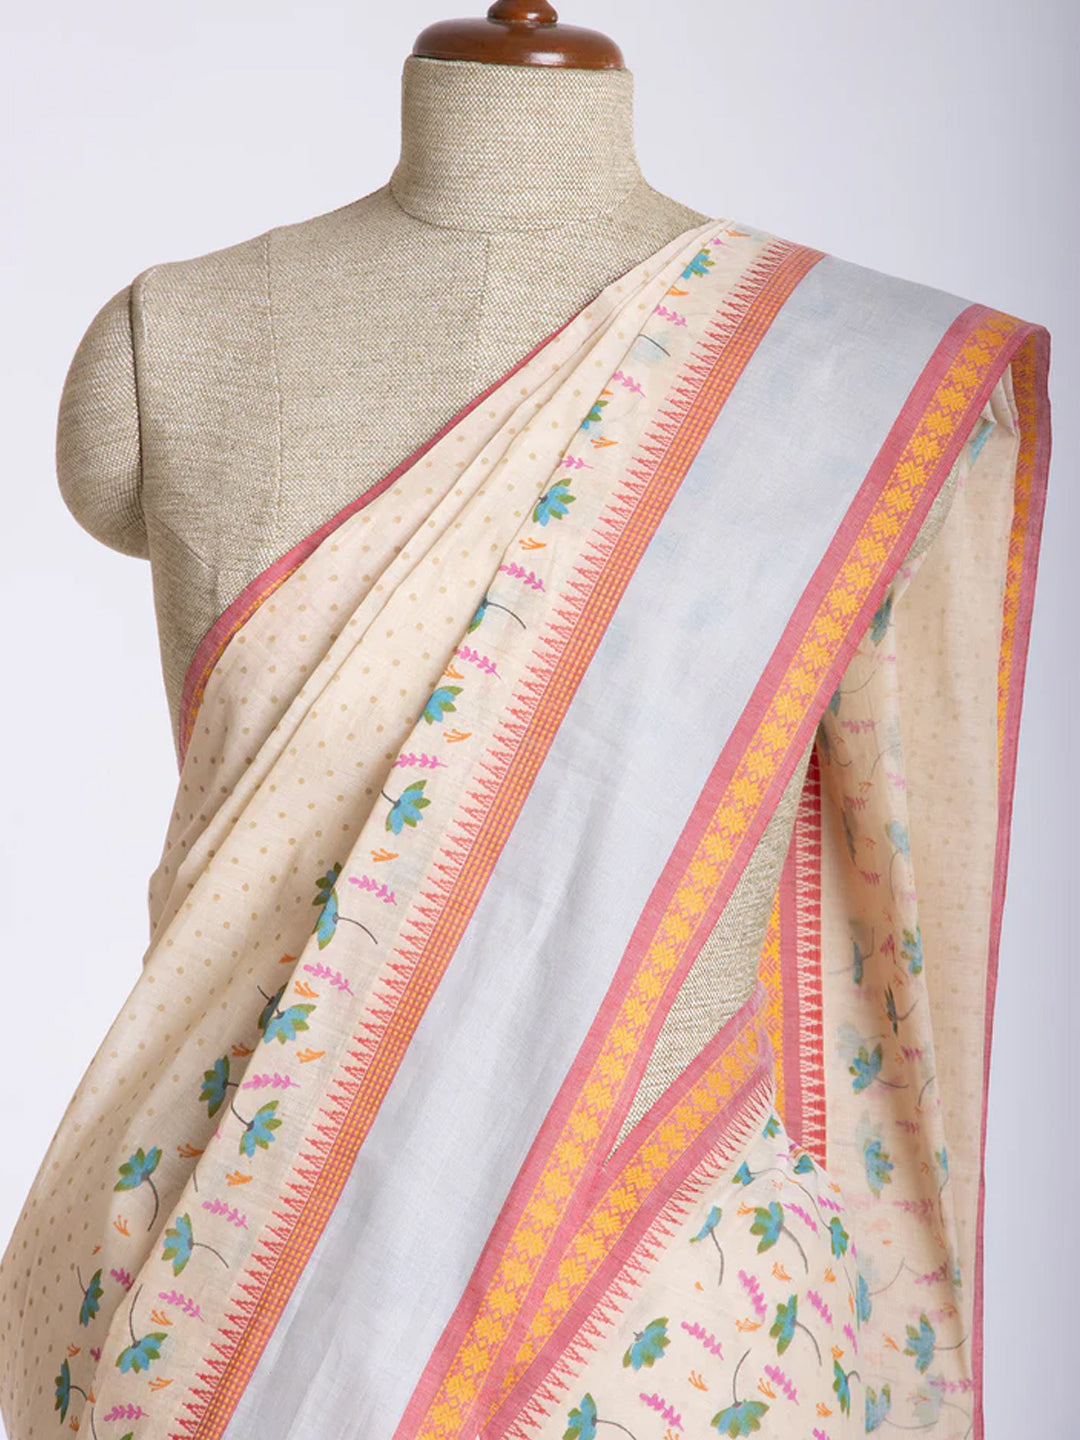 Womens Elegant Semi Cotton Off White With Flowered Design All over Printed Saree SCS63